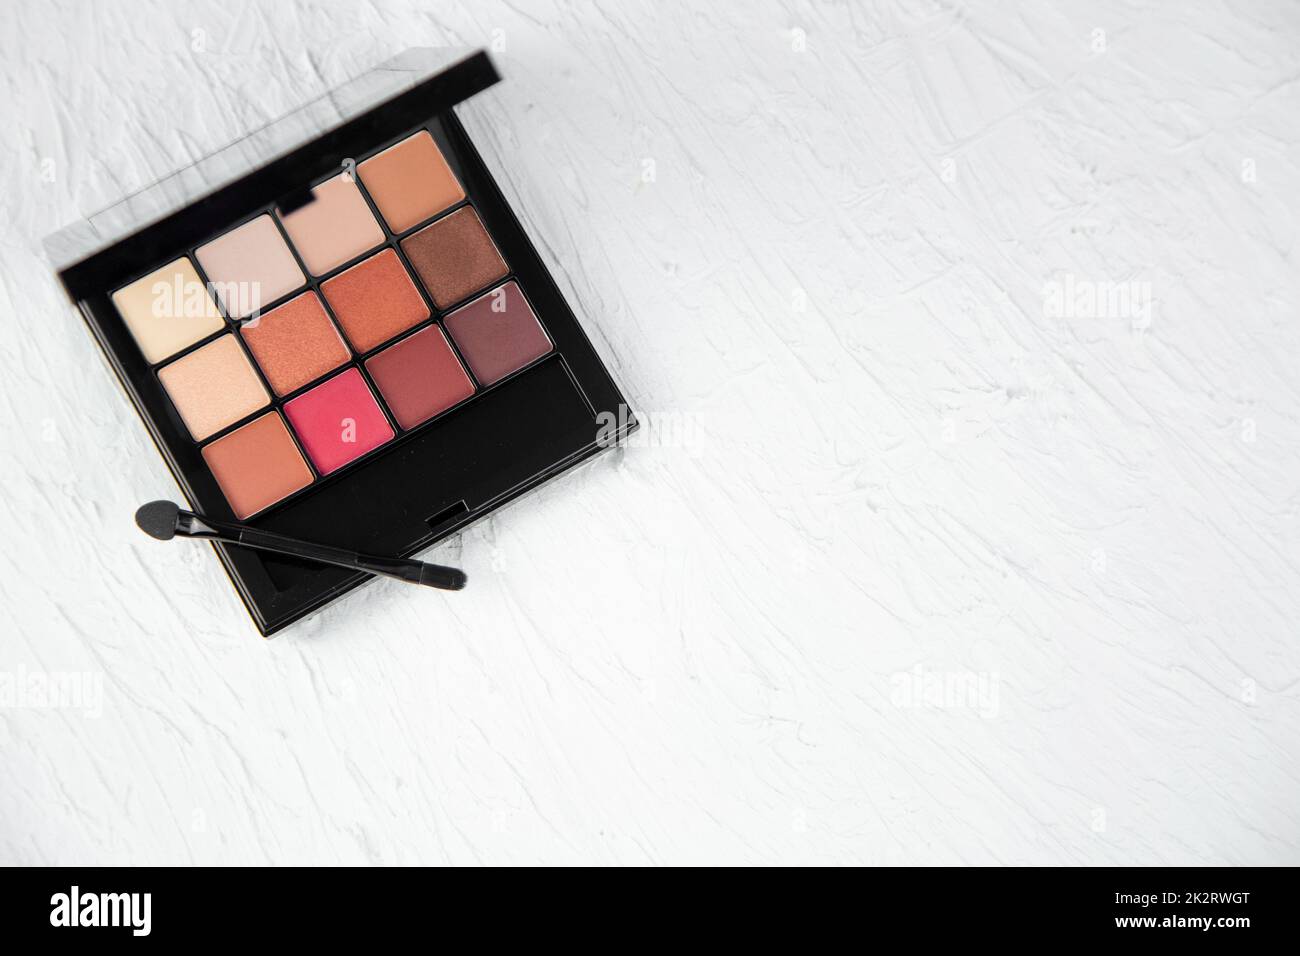 The eyeshadow palette lies in the upper left corner on a white textured background Stock Photo